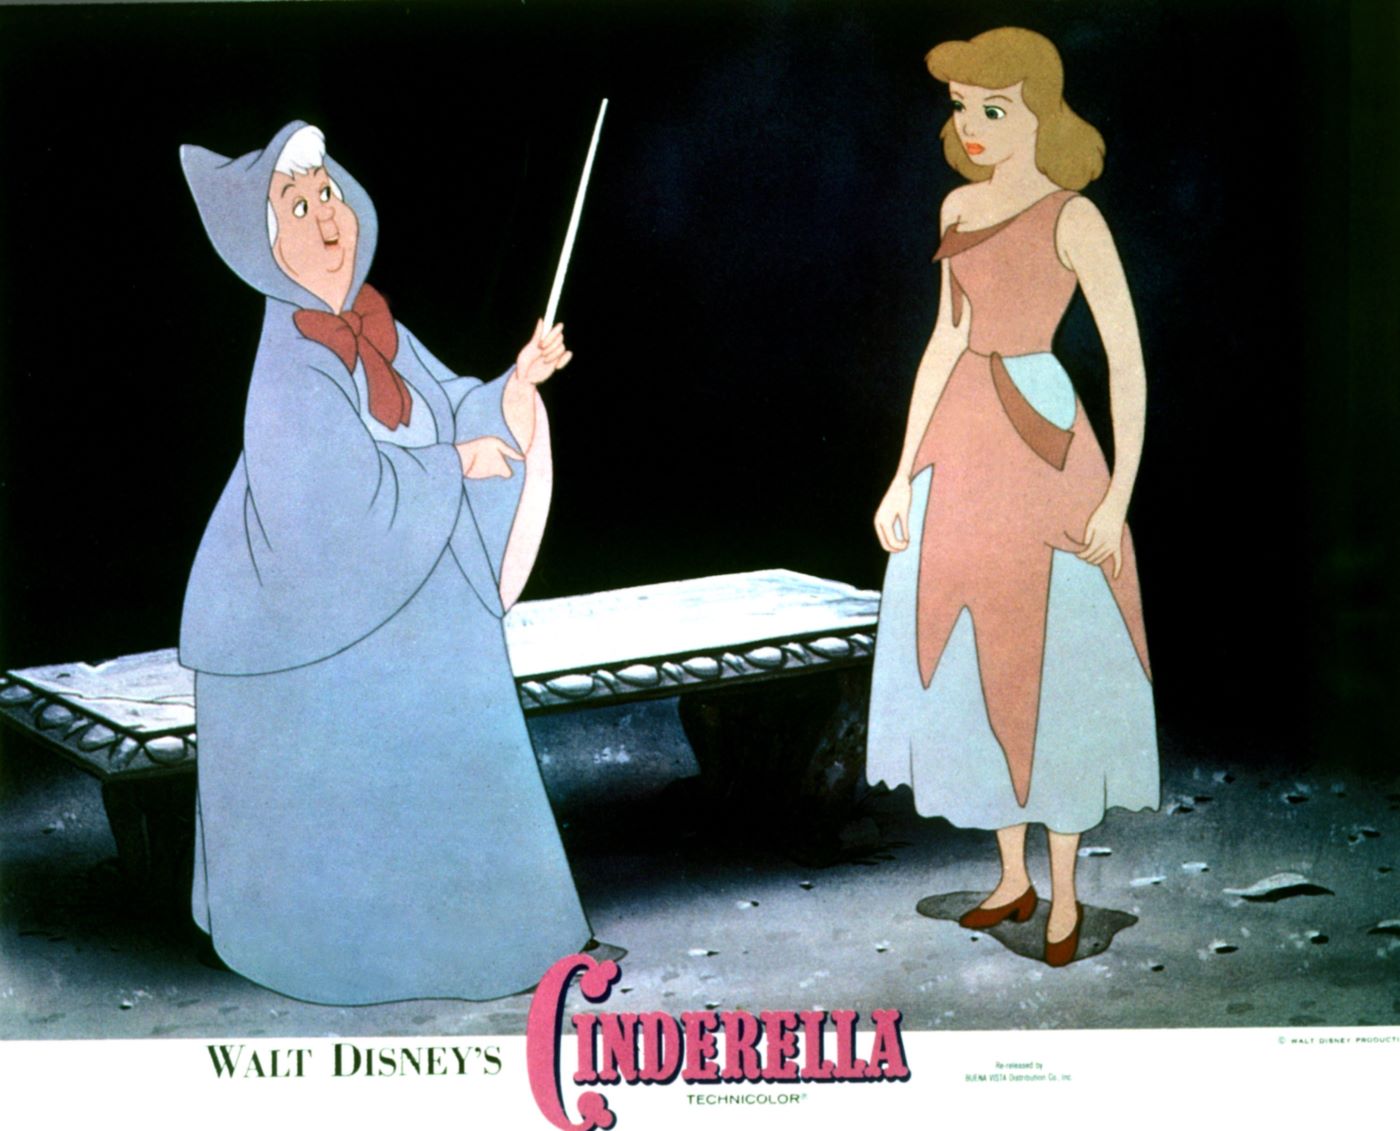 Who Are the Voices Behind Disney's 'Cinderella'?